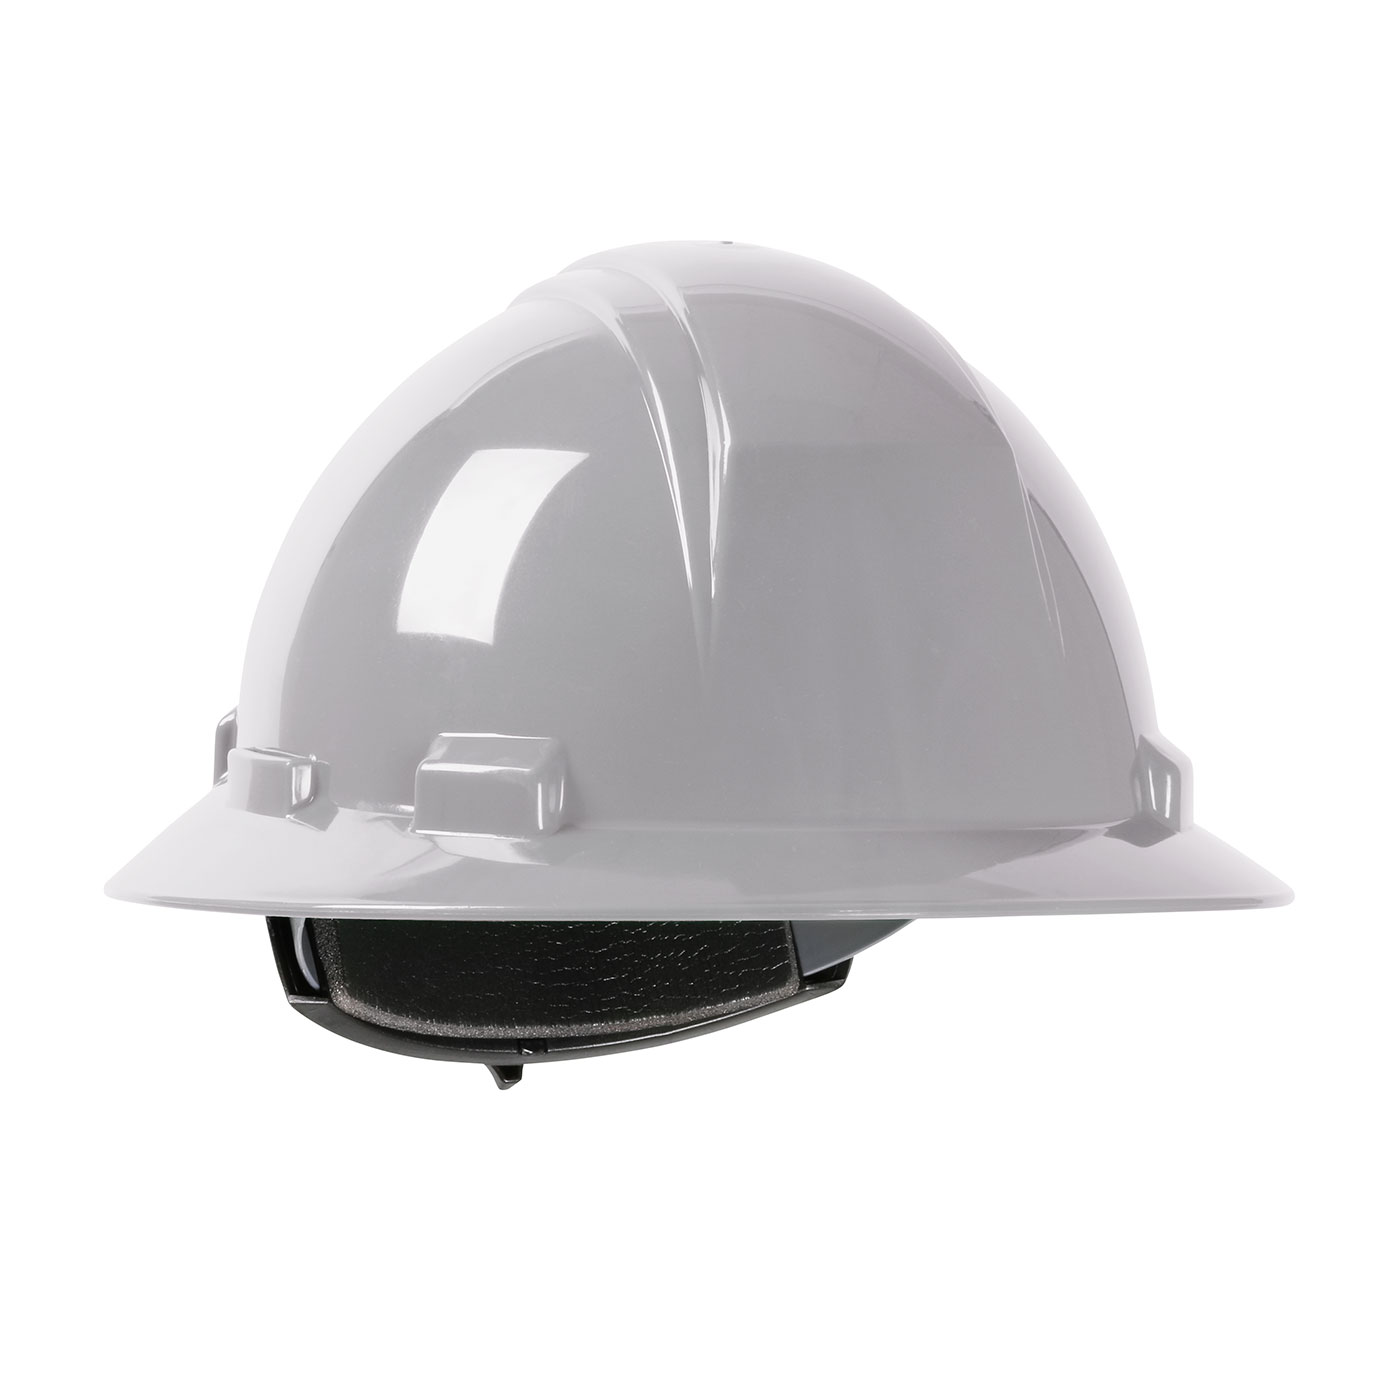 PIP® Dynamic Kilimanjaro™ 280-HP641R-09 Full Brim Hard Hat with HDPE Shell, 4 Point Textile Suspension and Wheel Ratchet Adjustment, Gray